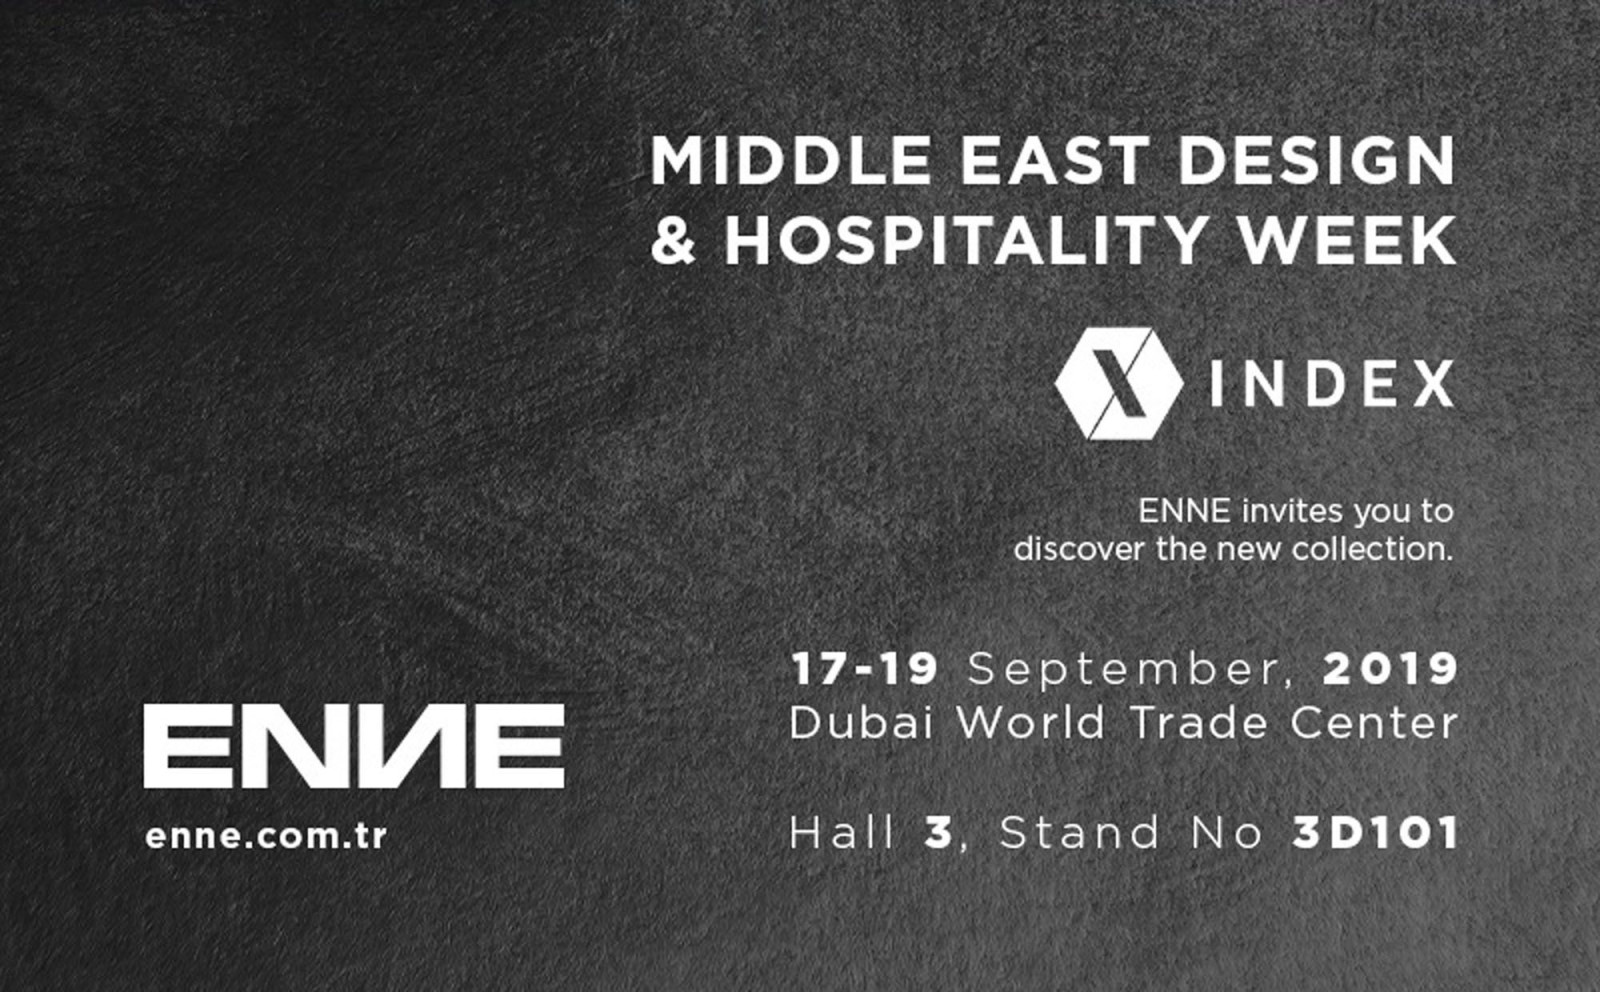 ENNE invites you to discover the new collection in Middle East Design and Hospitality Week.